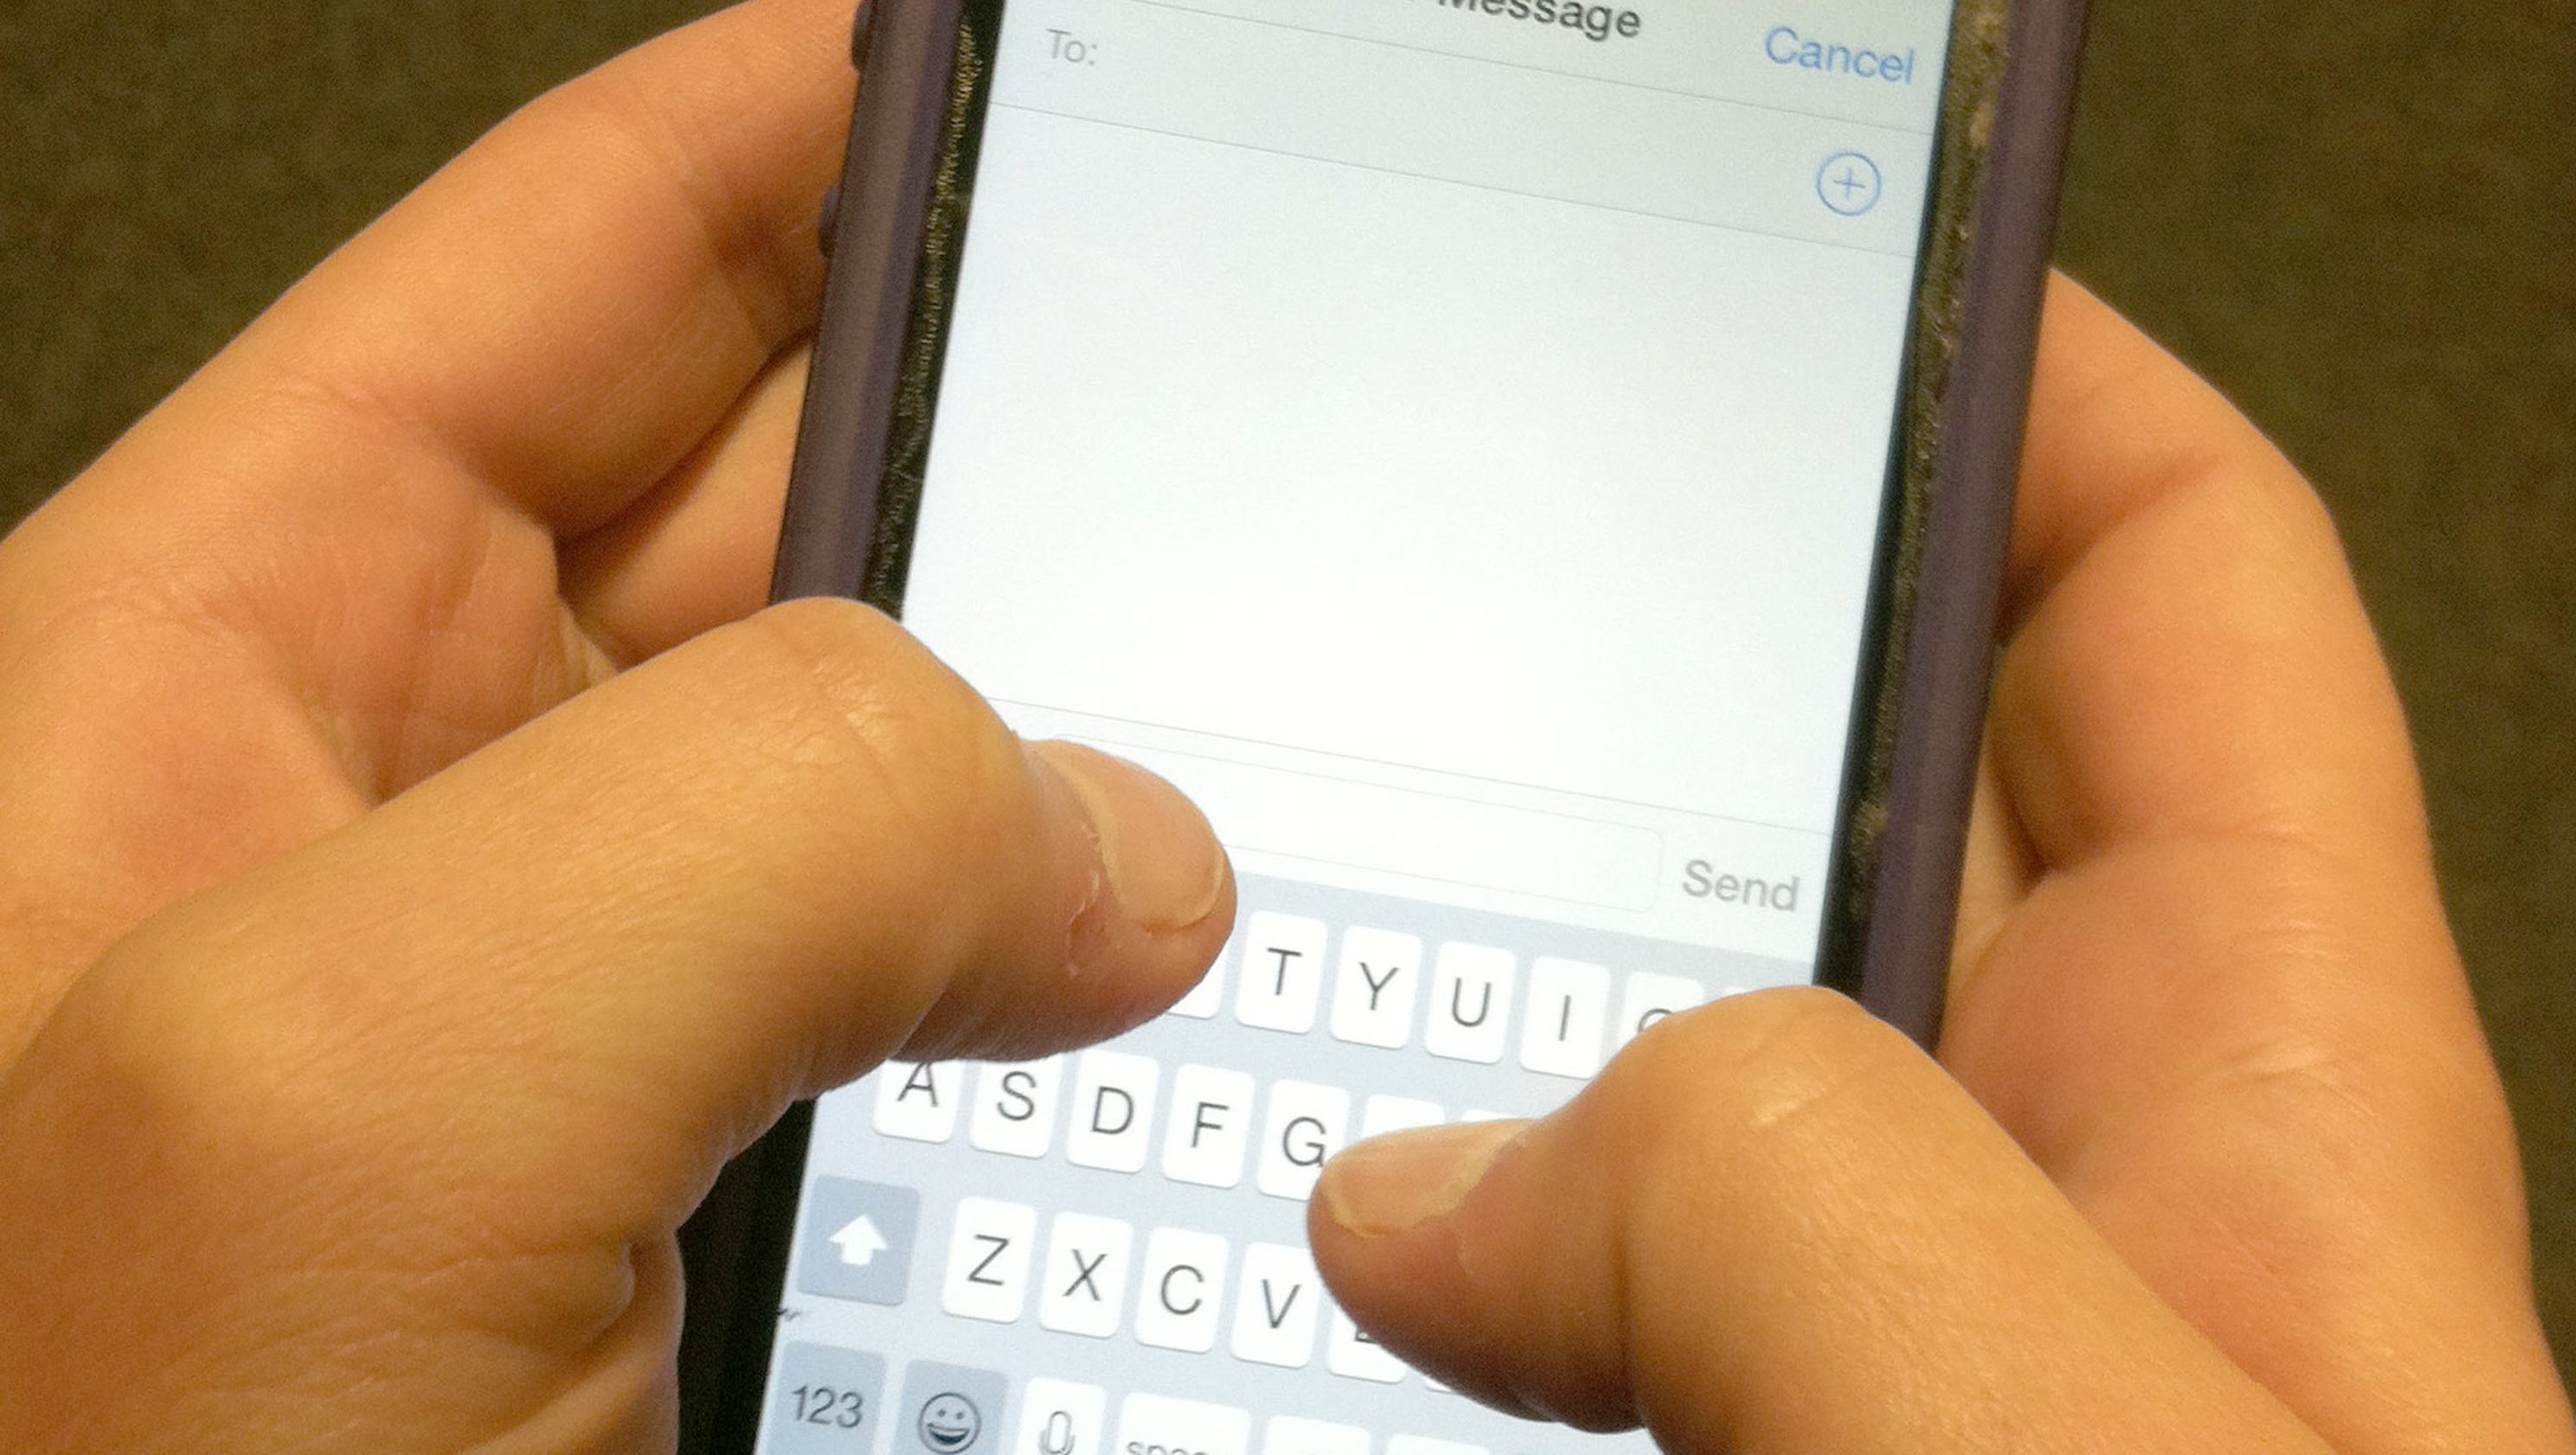 Teens Might Face Felony Charges For Sexting